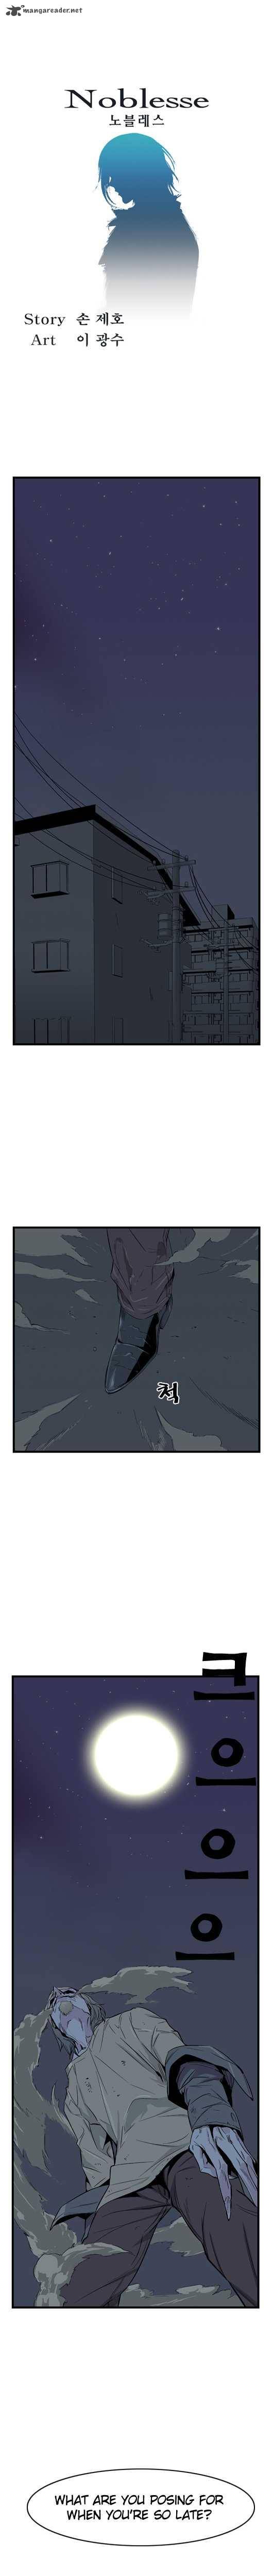 Noblesse 23 1